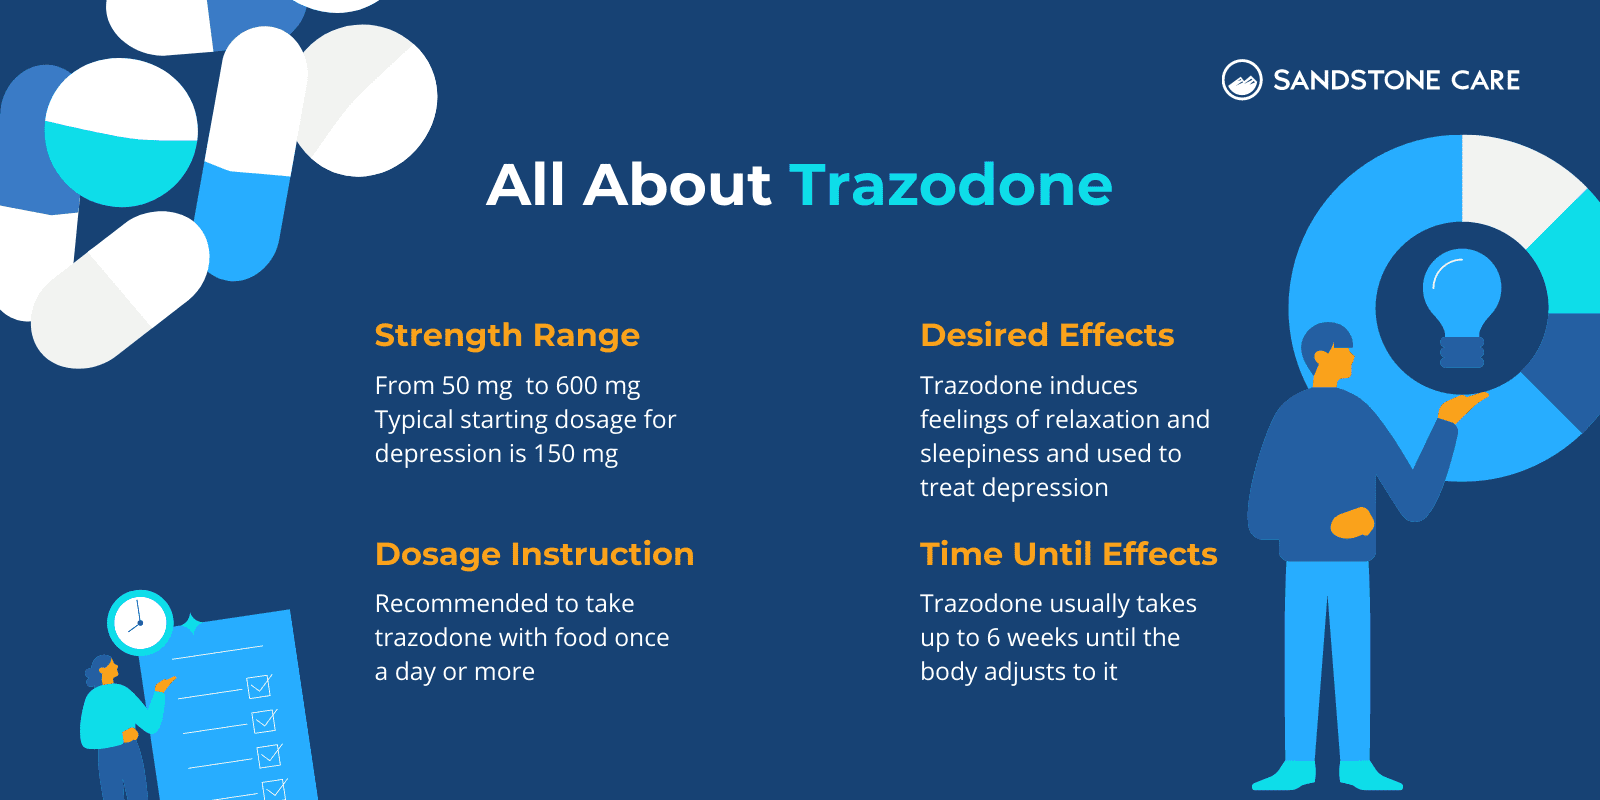 All about Trazodone; Strength Range, Dosage Instruction, Desired Effects, and Time until Effects written with relevant icons